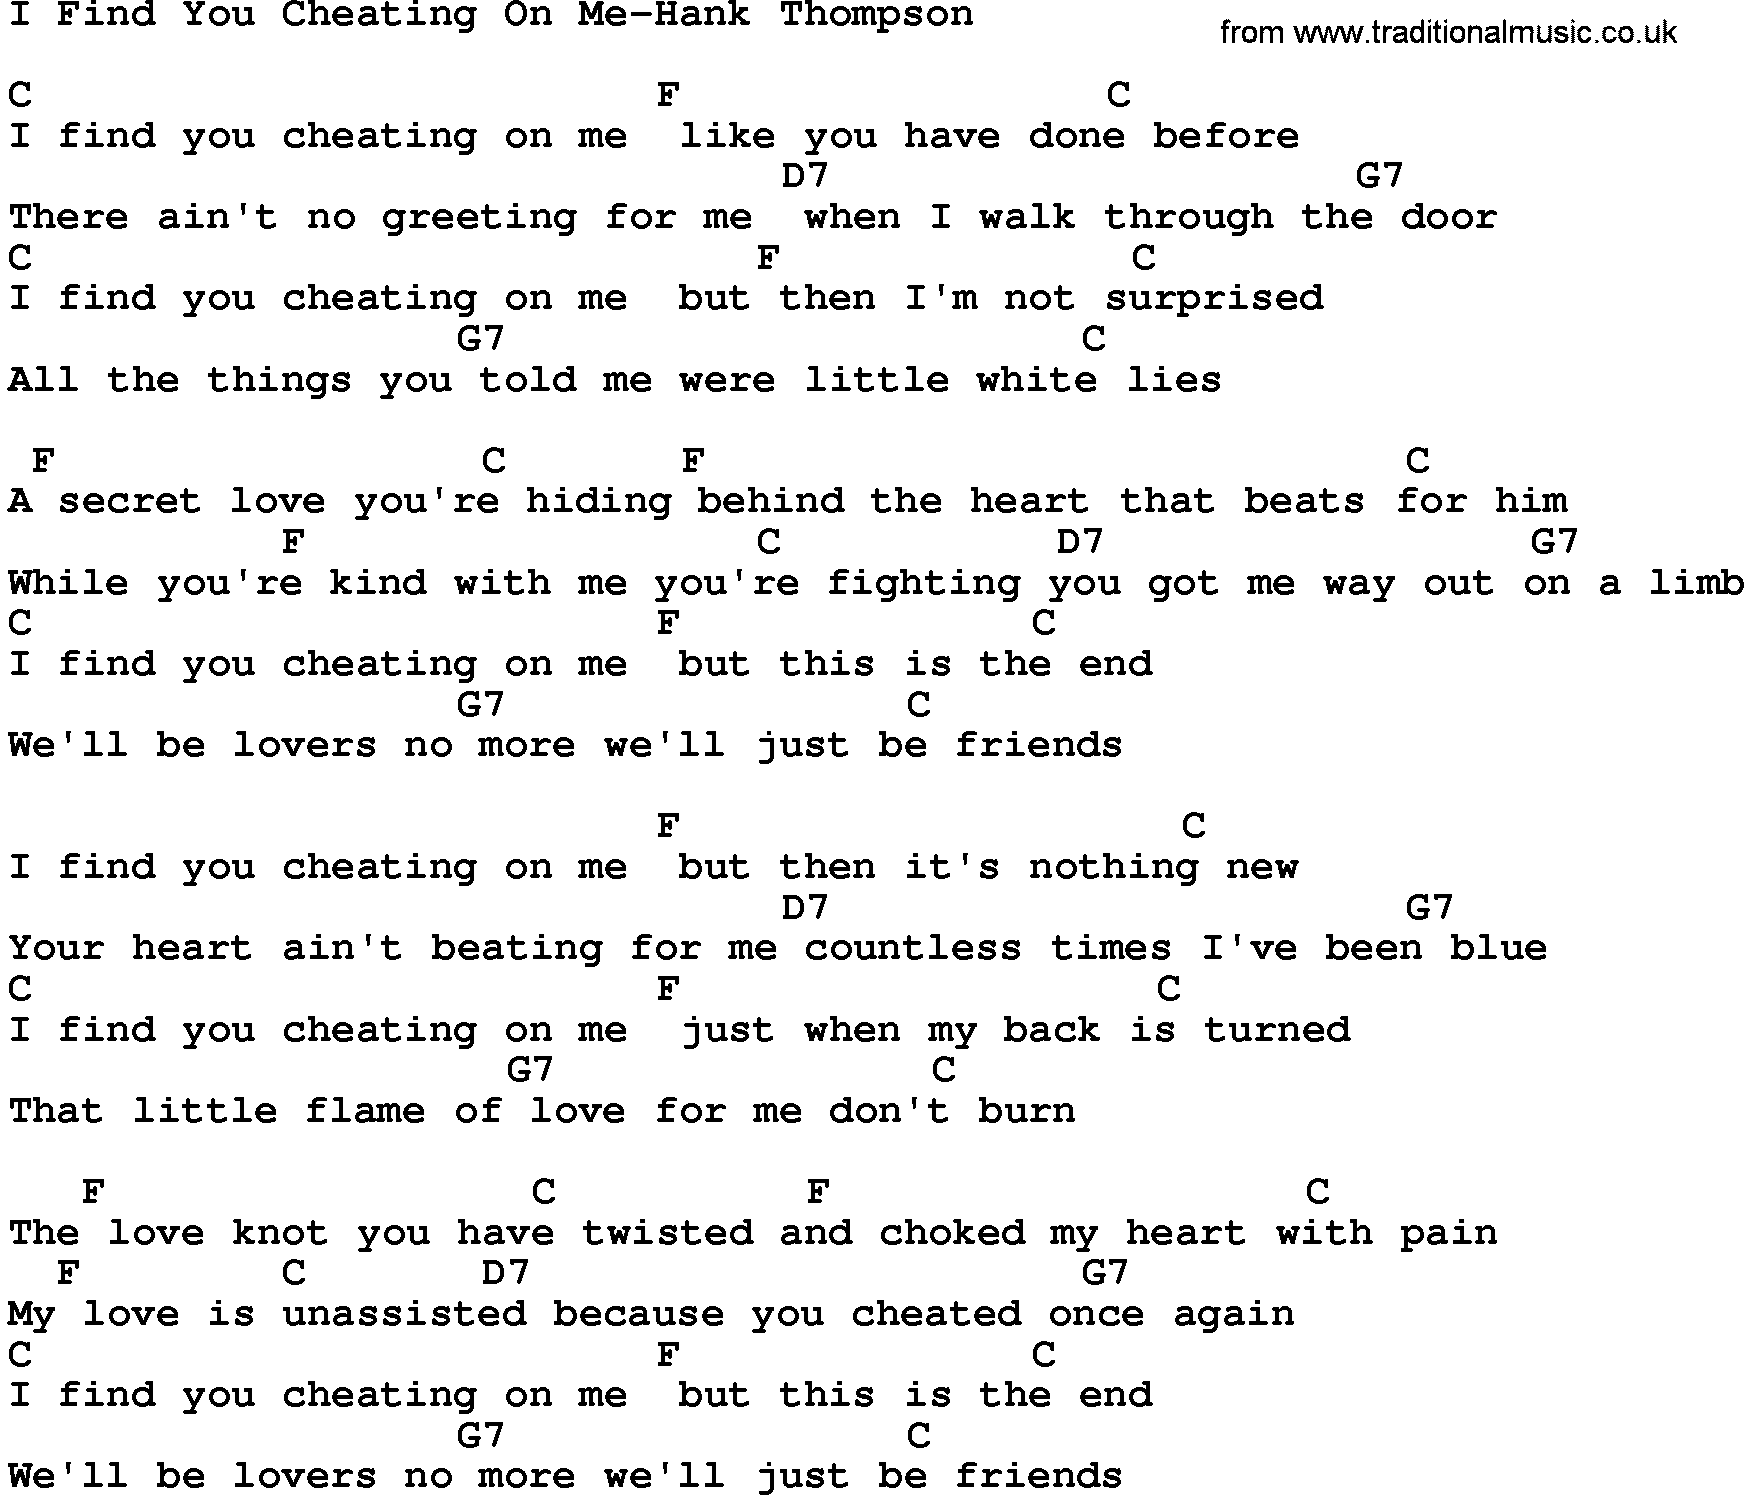 Country music song: I Find You Cheating On Me-Hank Thompson lyrics and chords